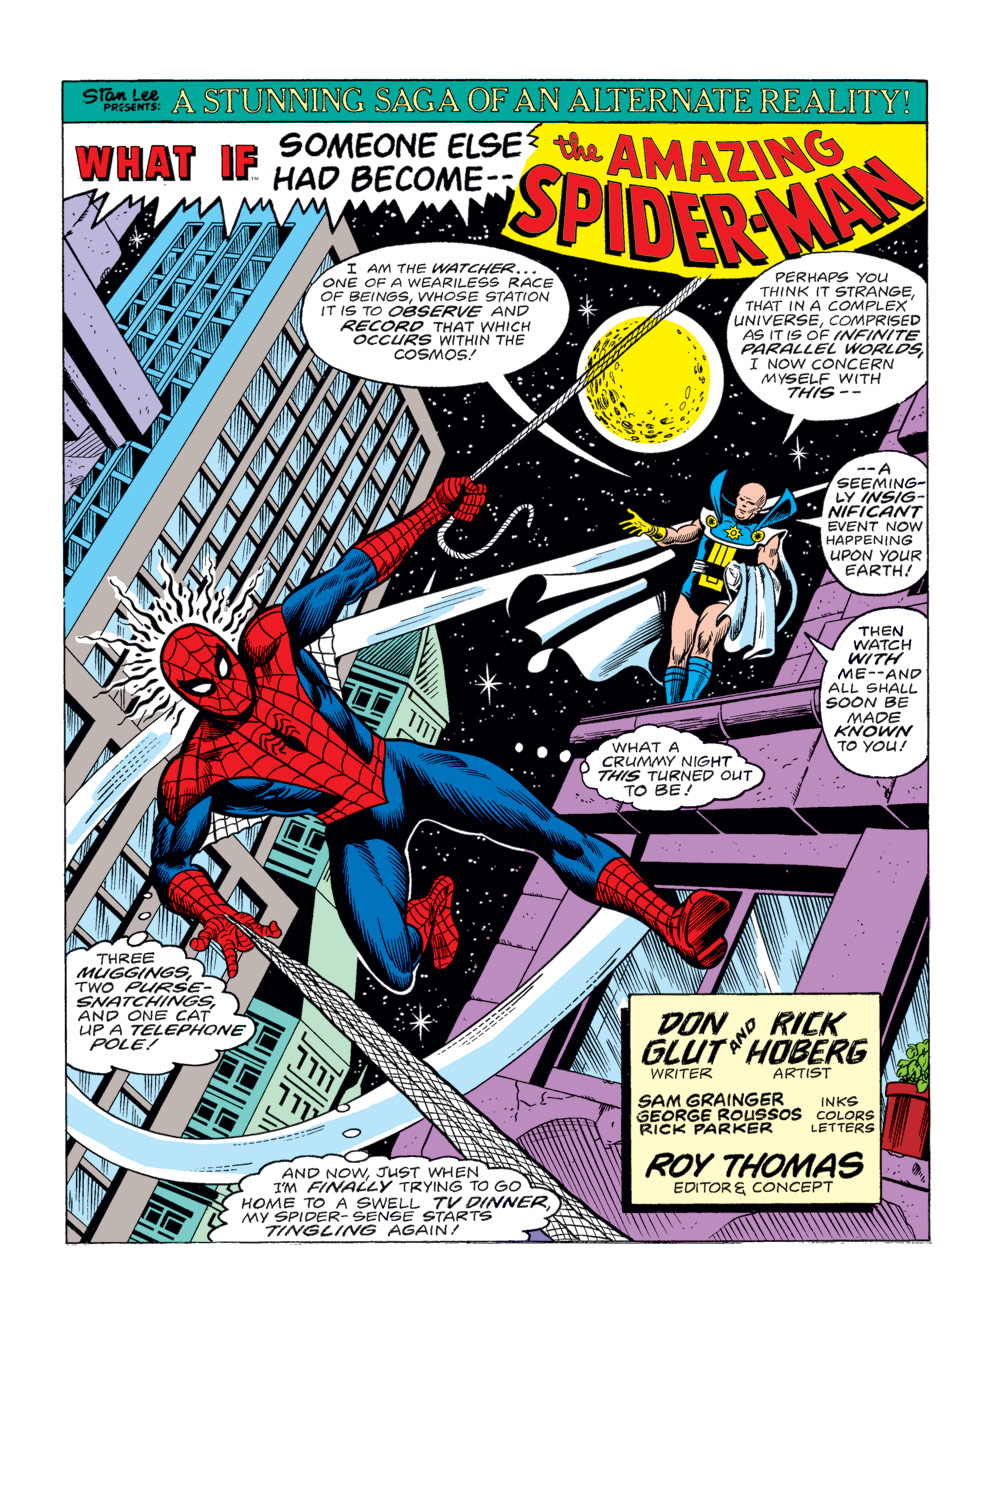 What If? (1977) issue 7 - Someone else besides Spider-Man had been bitten by a radioactive spider - Page 2